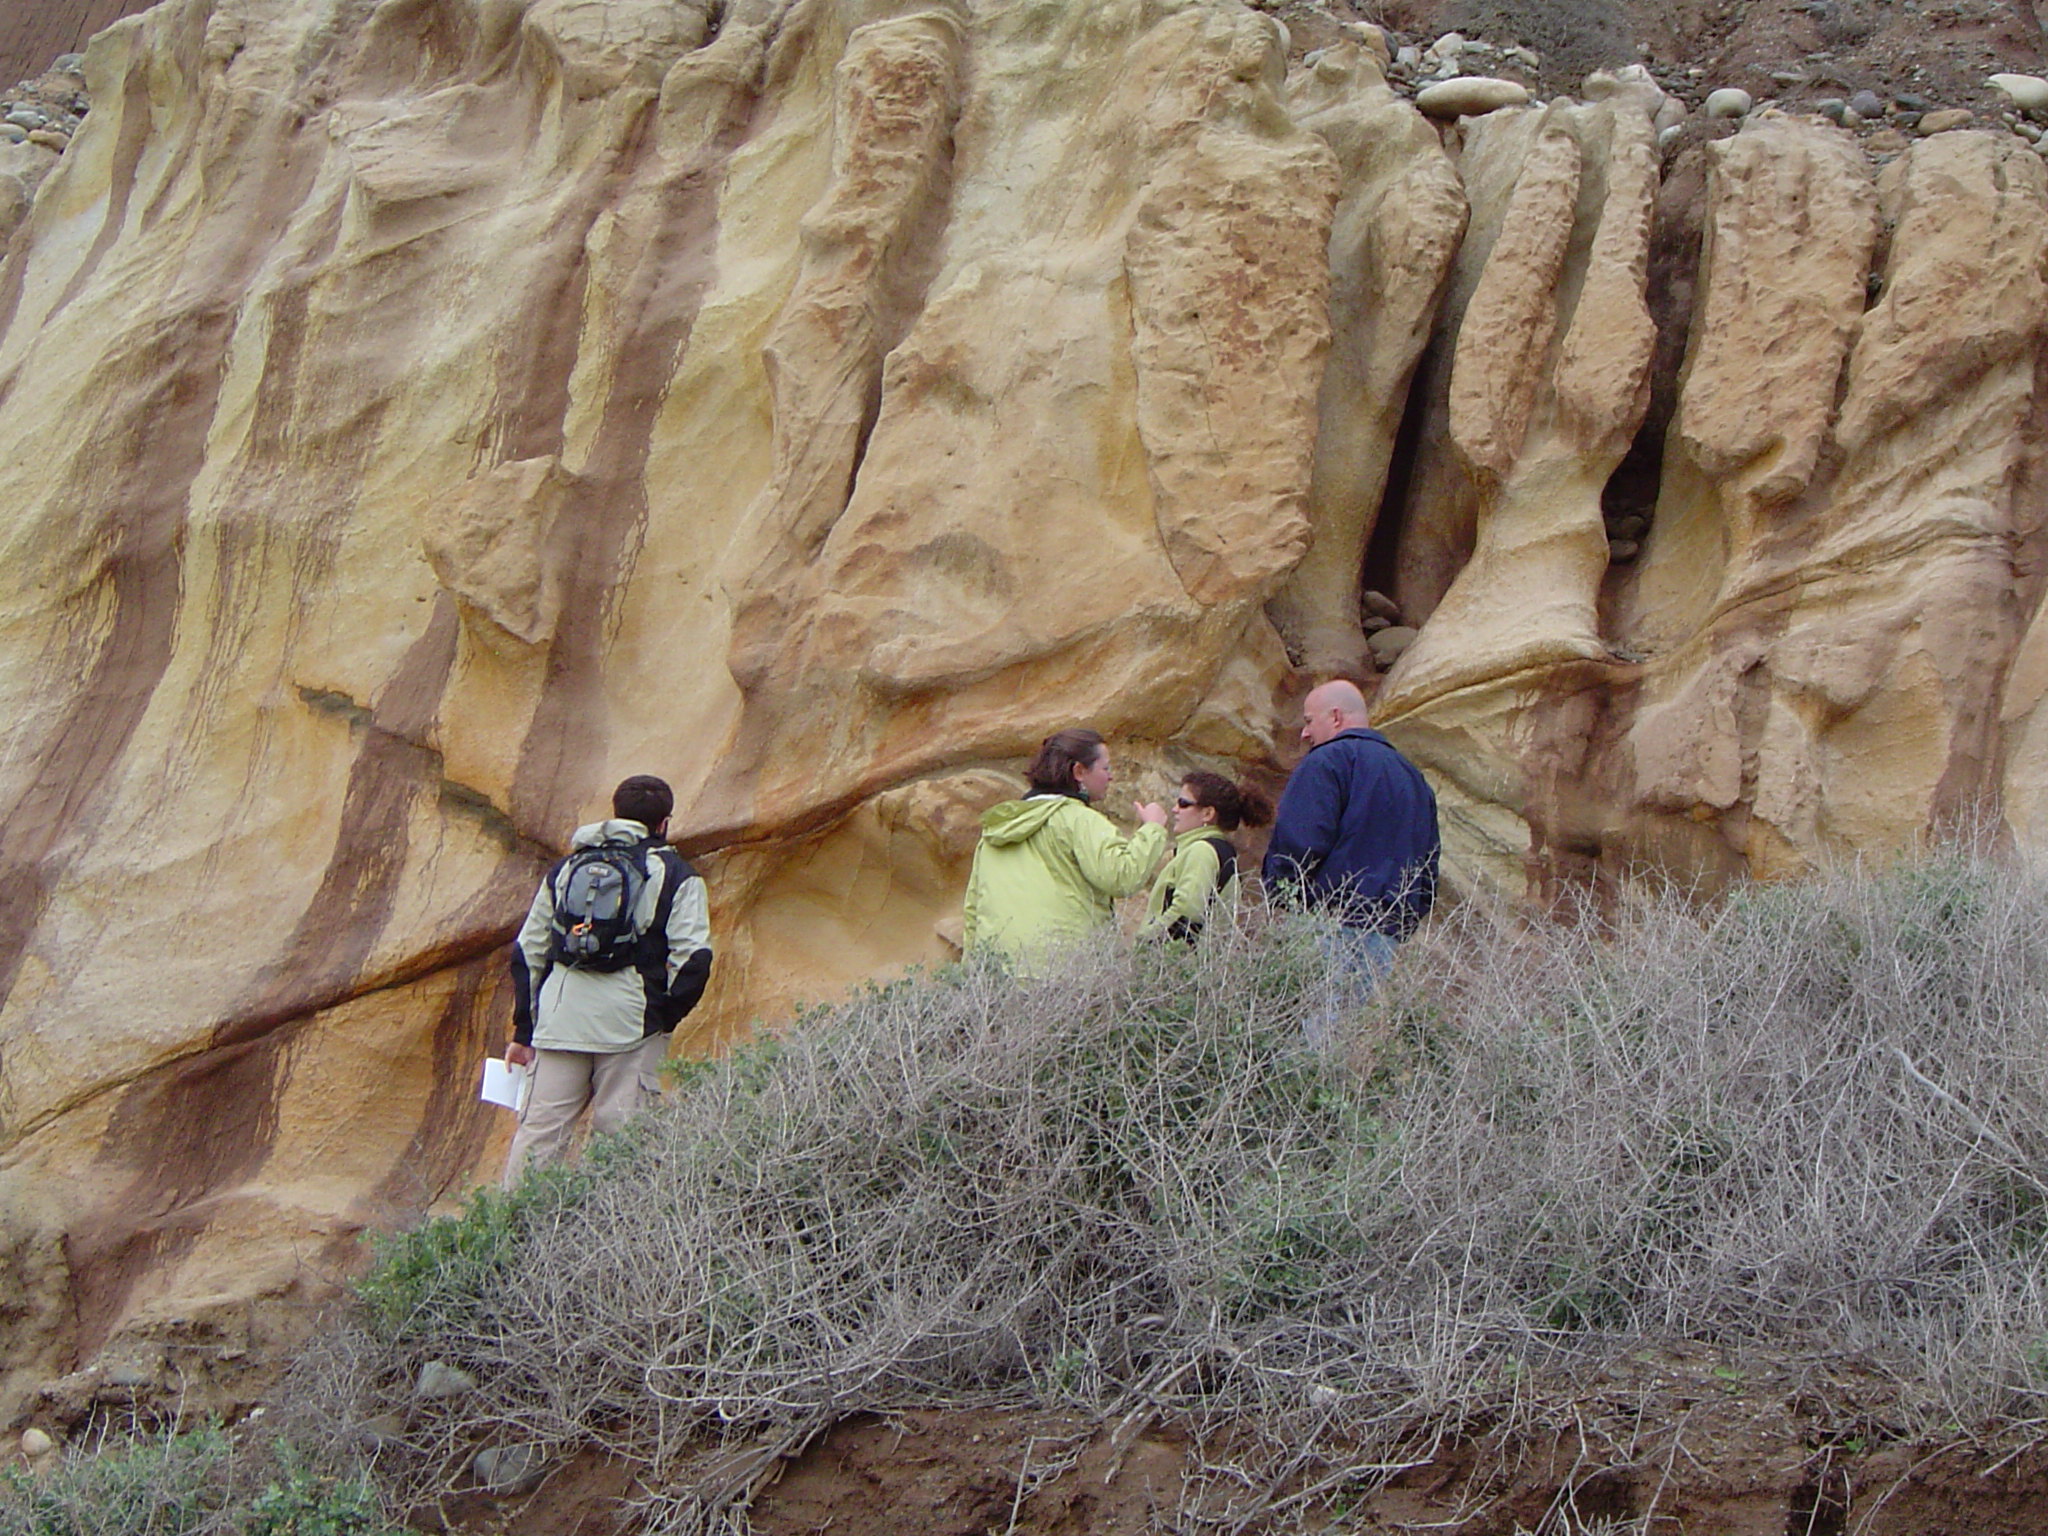 Scott, Laura and Michele discussing the outcrop